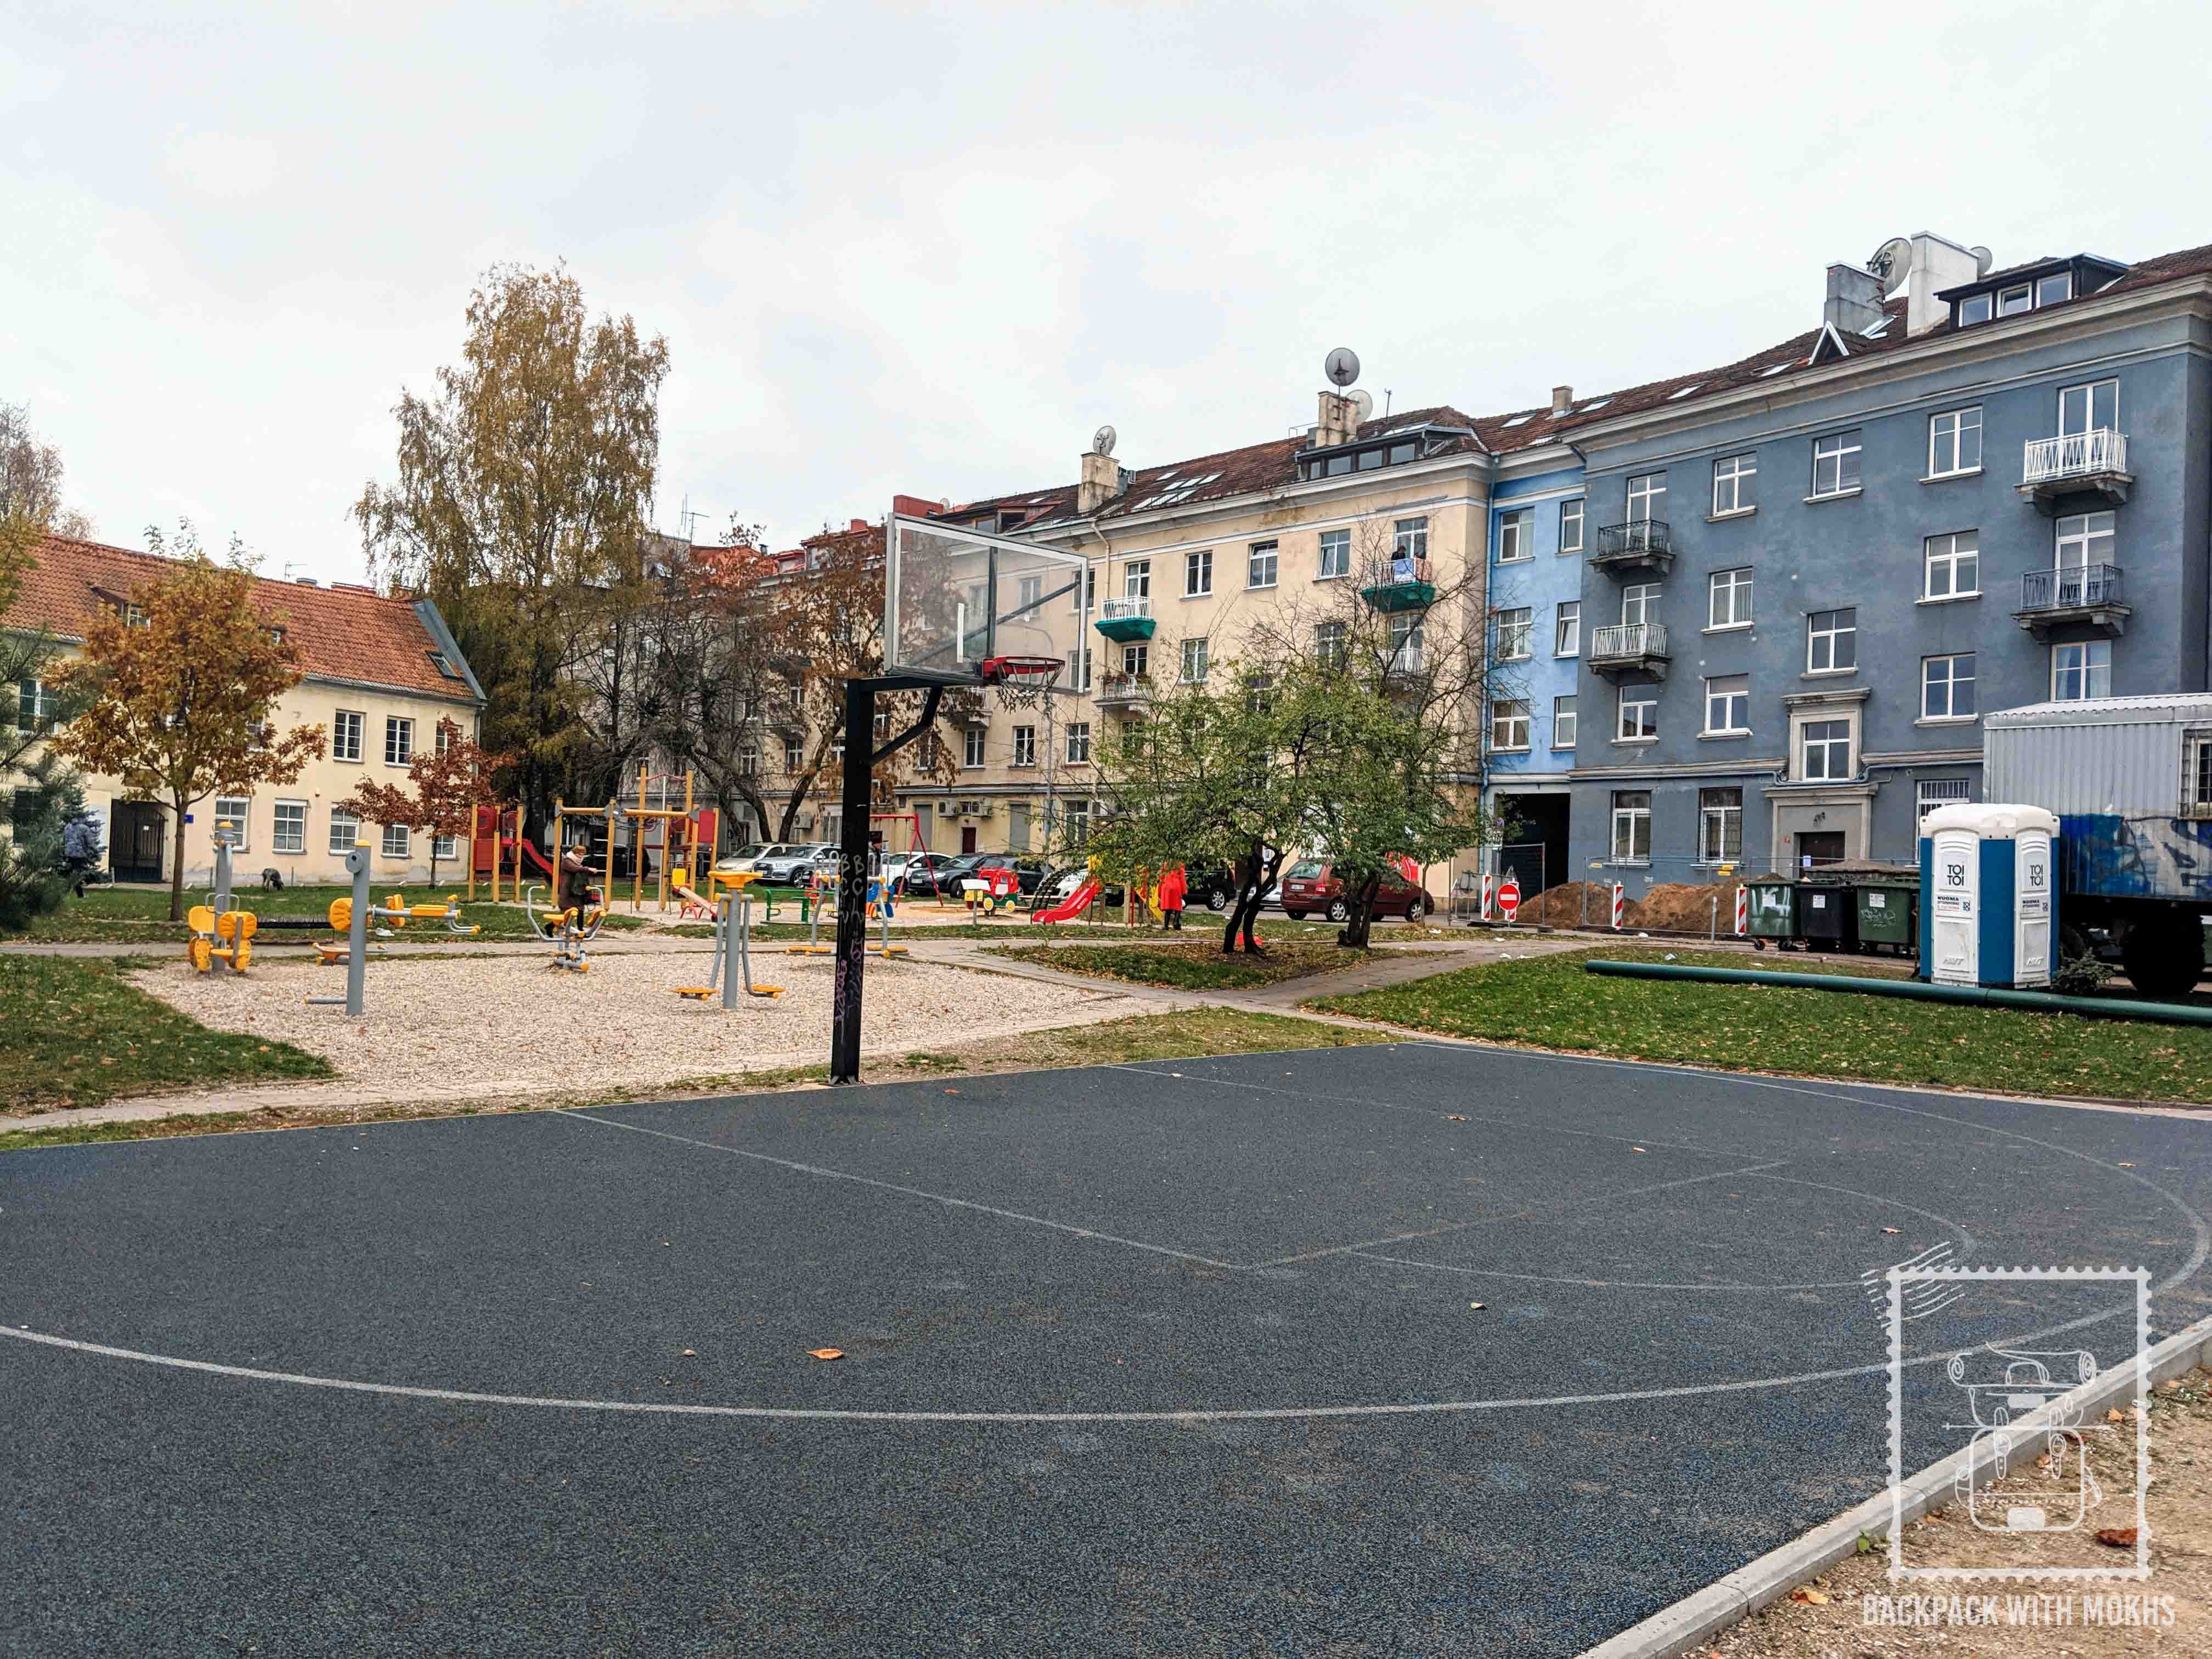 Basketball in Lithuania